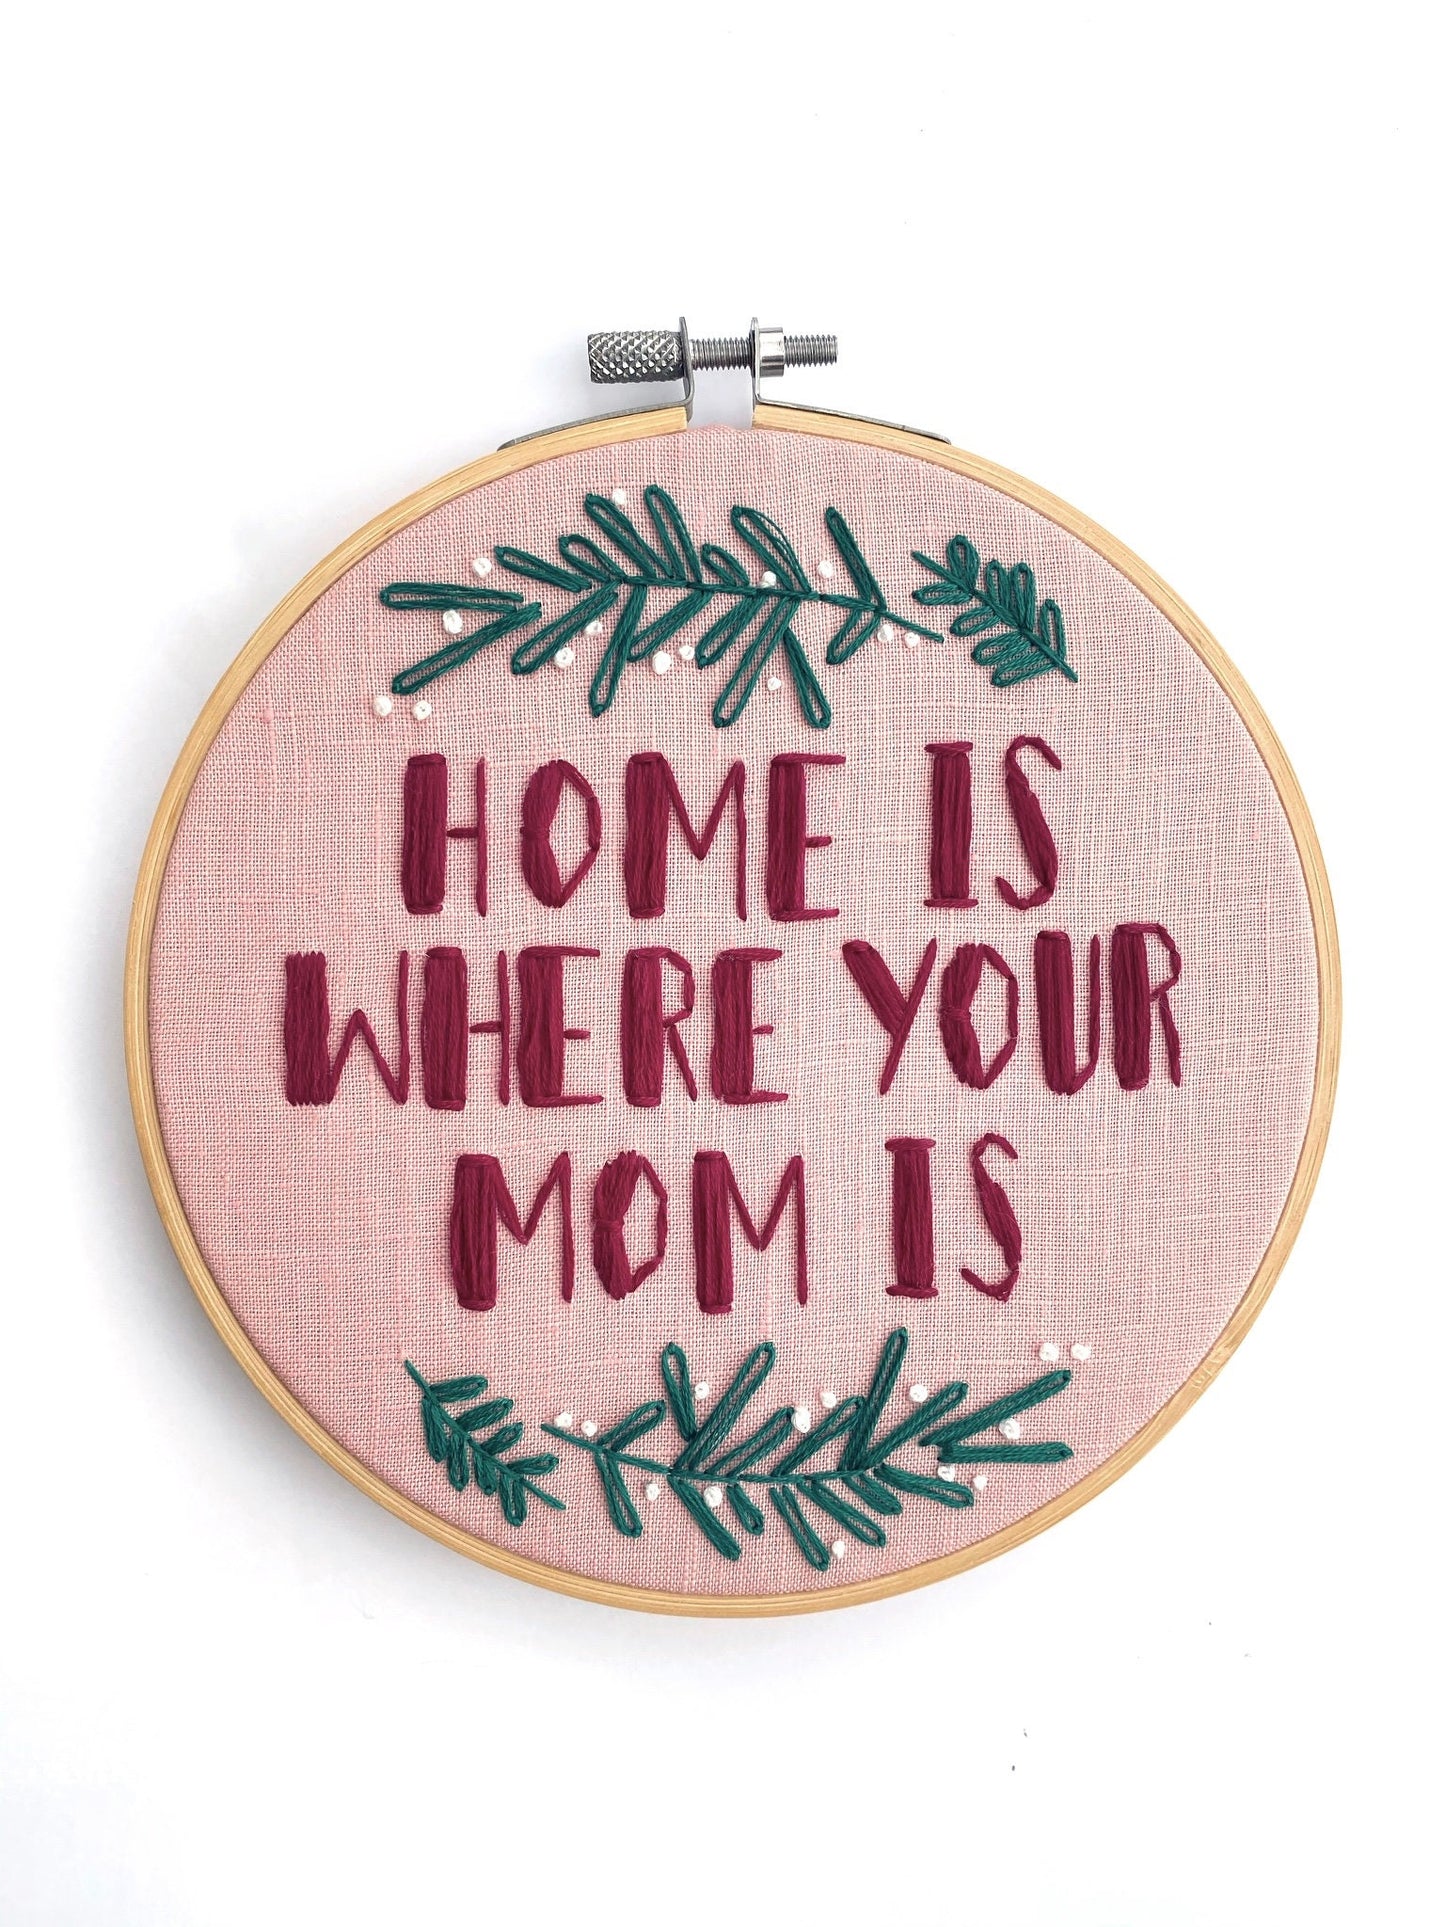 Home Is Where Your Mom Is PDF Embroidery Pattern